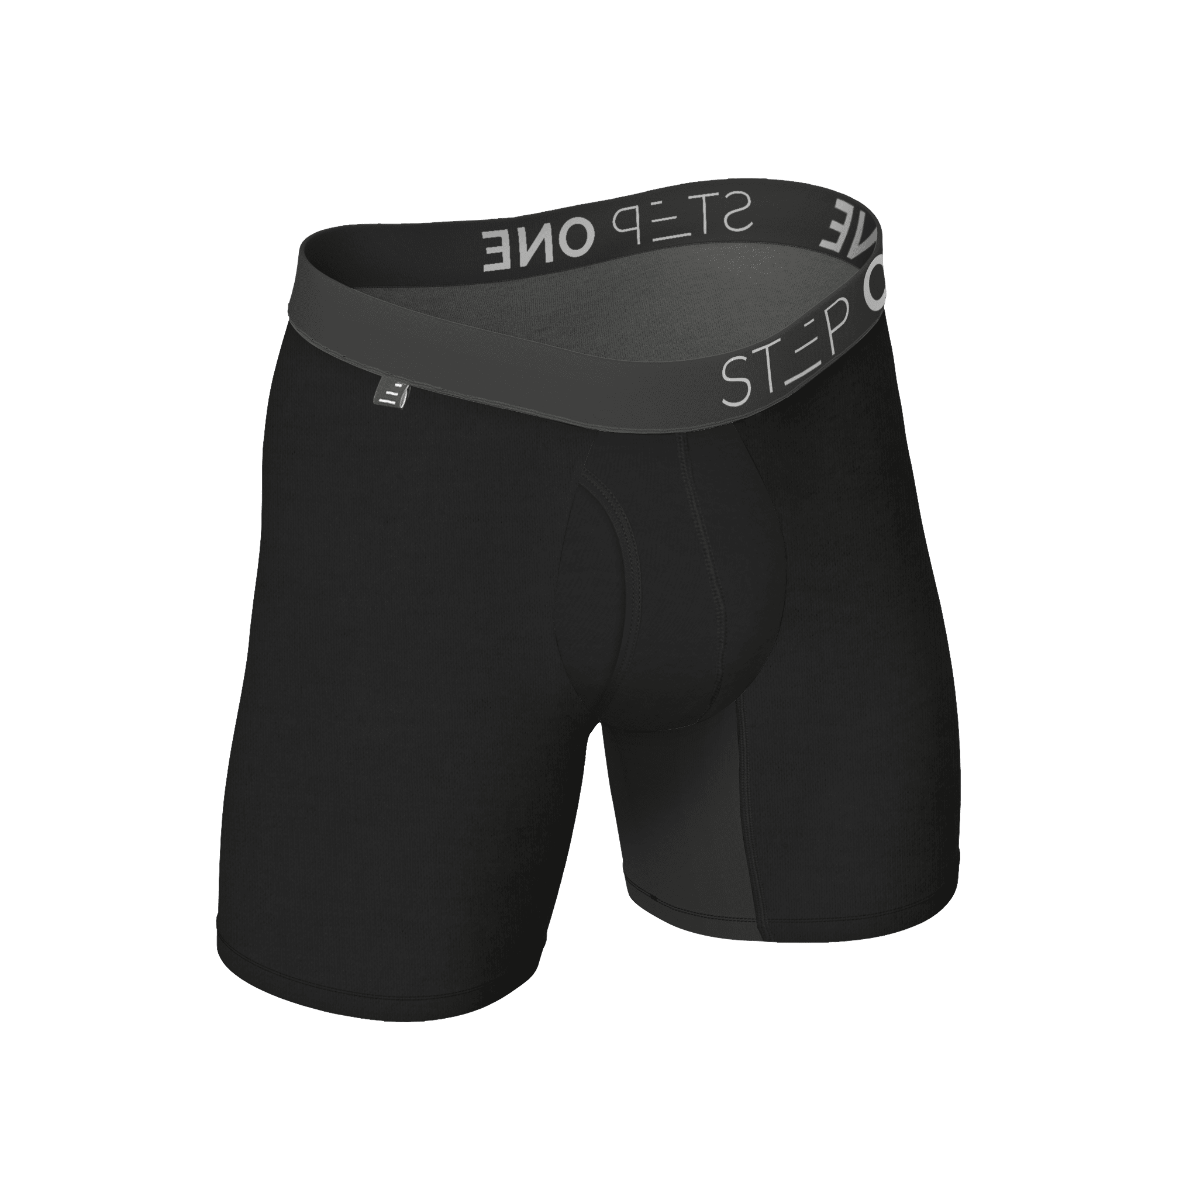 Step One Bamboo Boxer Briefs With Fly, Pack of 3, £54.00